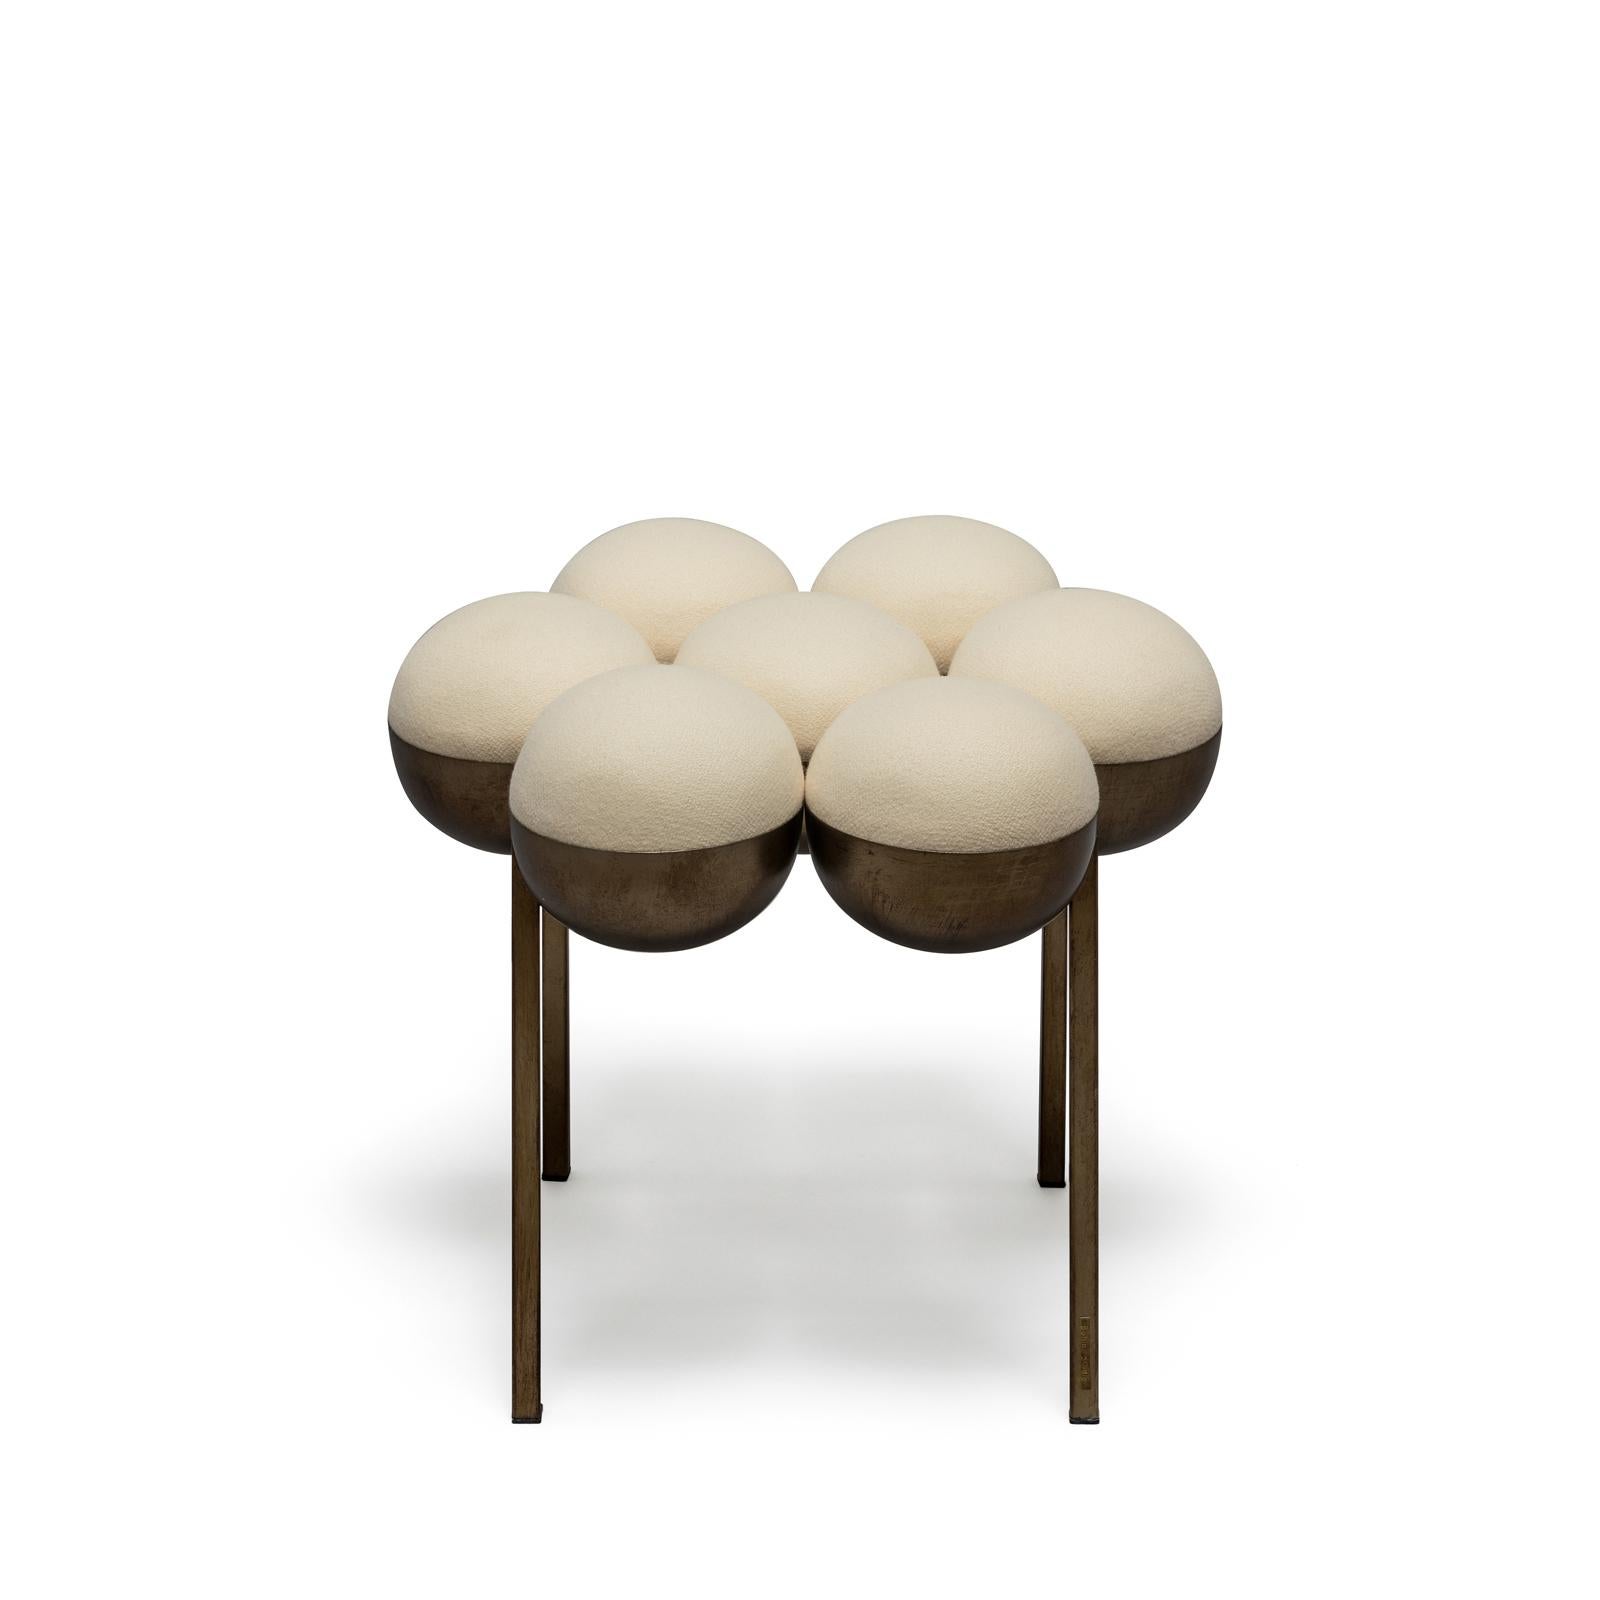 The equally singular Saturn pouffe utilises the same gathered bilboquet seat construction, to create a more simplified but still incredibly distinctive form. The sumptuously undulating seat instantly appeals with its invitingly upholstered comfort,